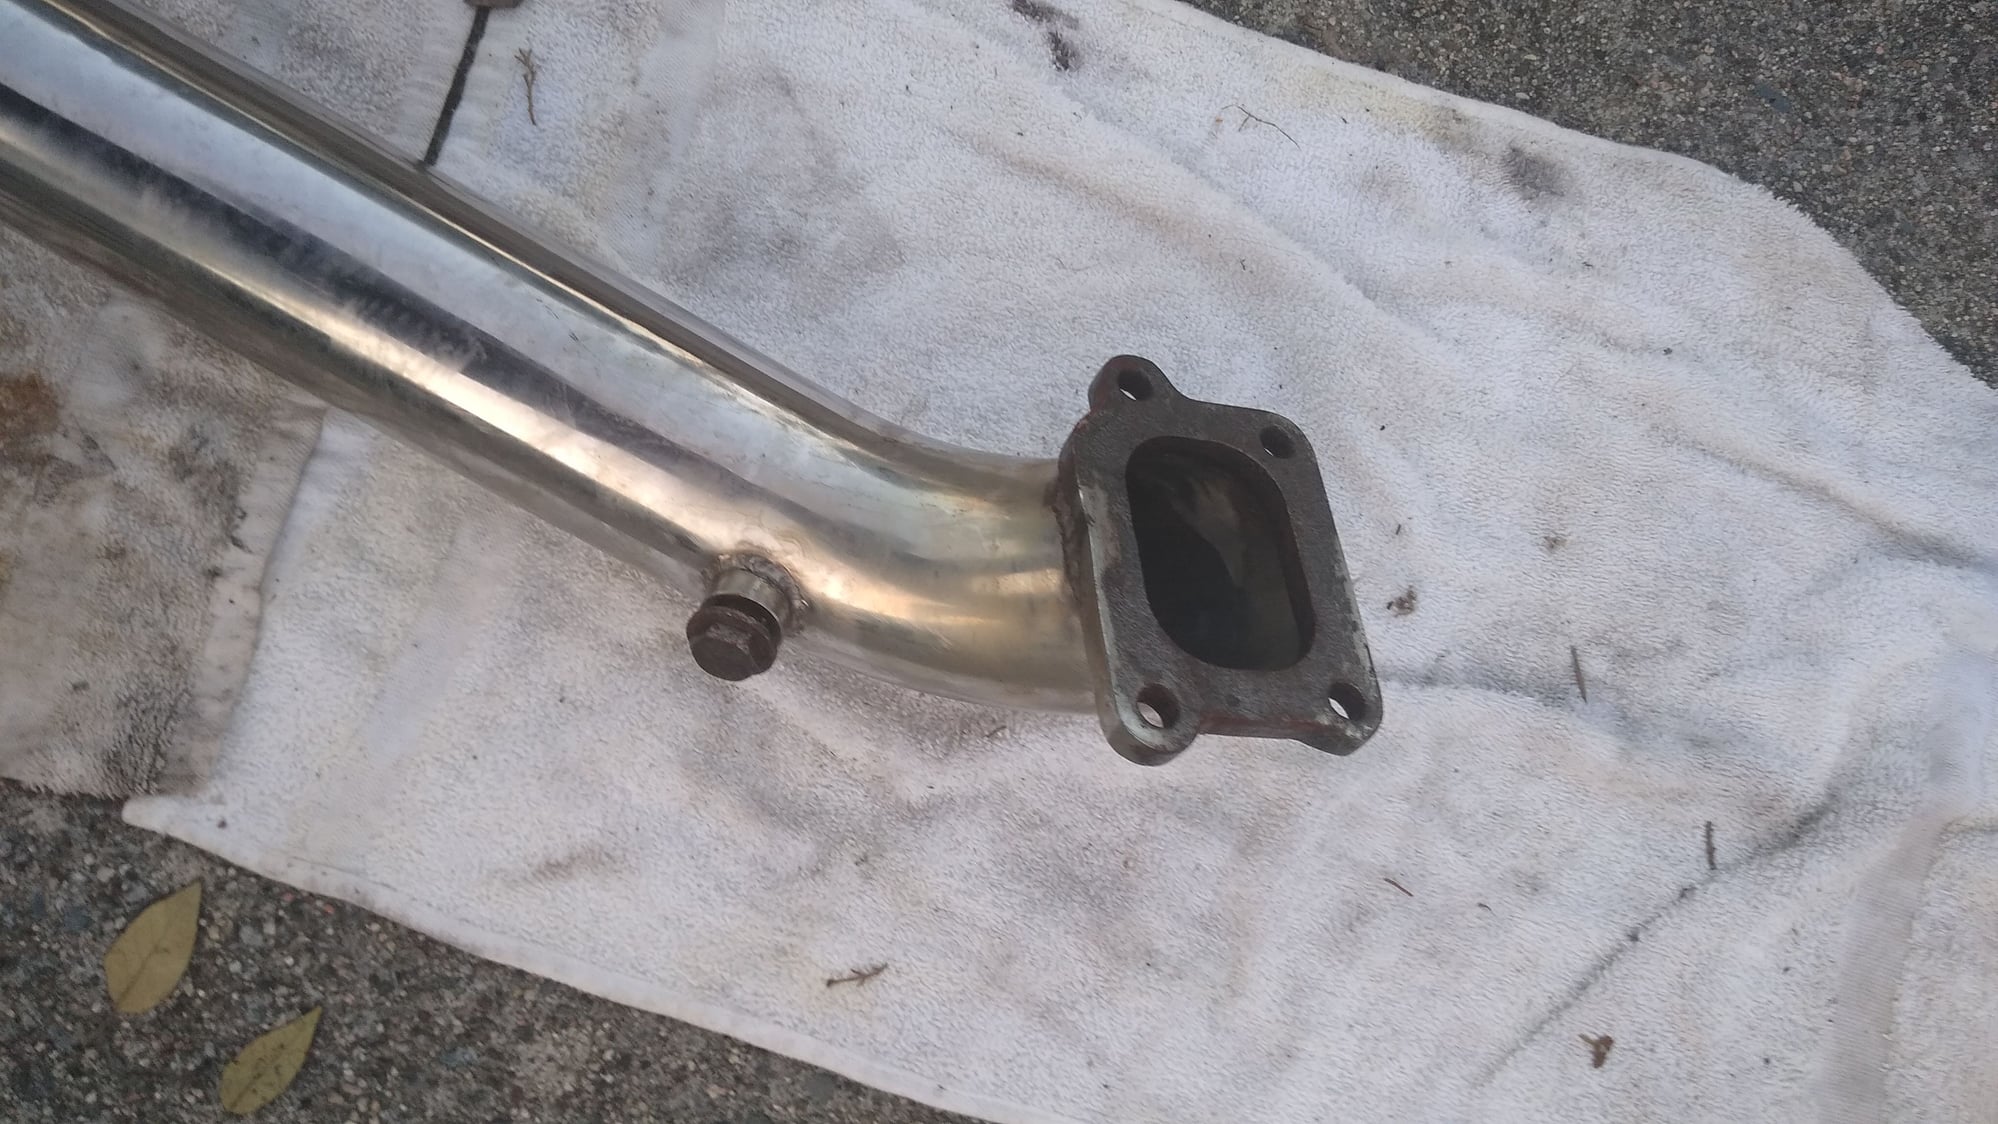 Engine - Exhaust - FD - Aftermarket S.S. Down Pipe LHD - New - 1993 to 1995 Mazda RX-7 - San Jose, CA 95121, United States